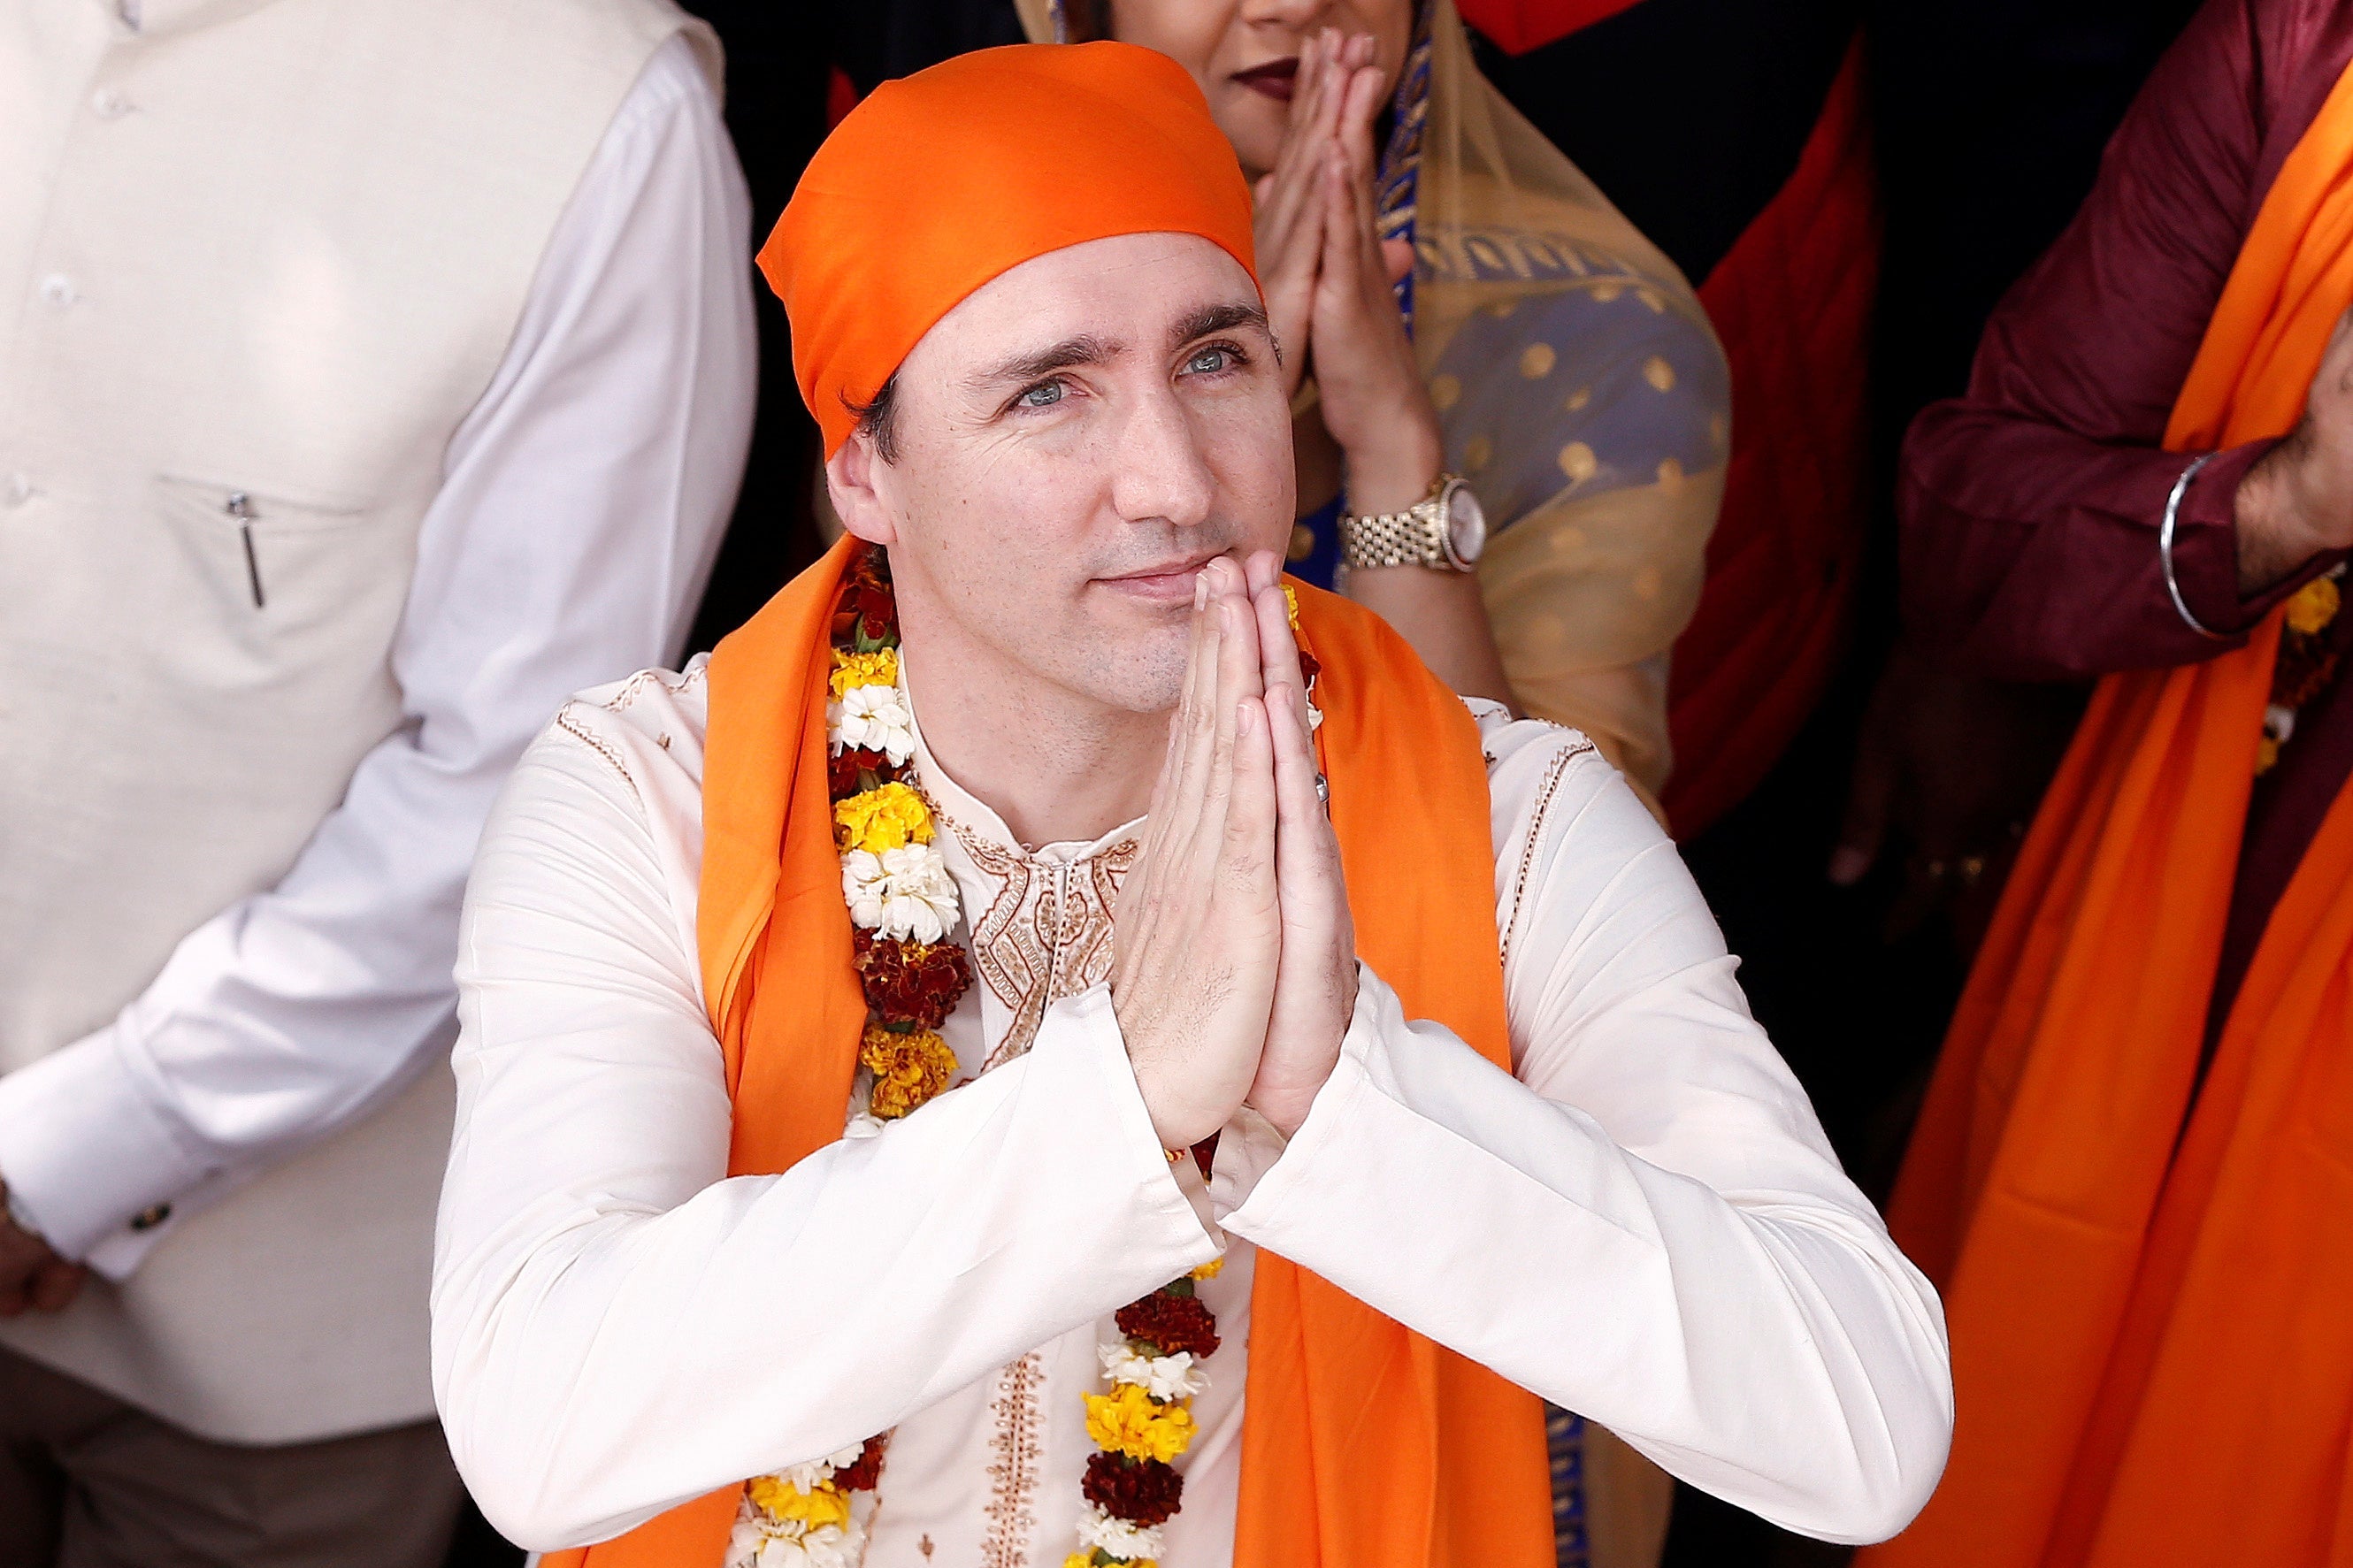 Justin Trudeau folds his hands in prayer while visiting a temple.